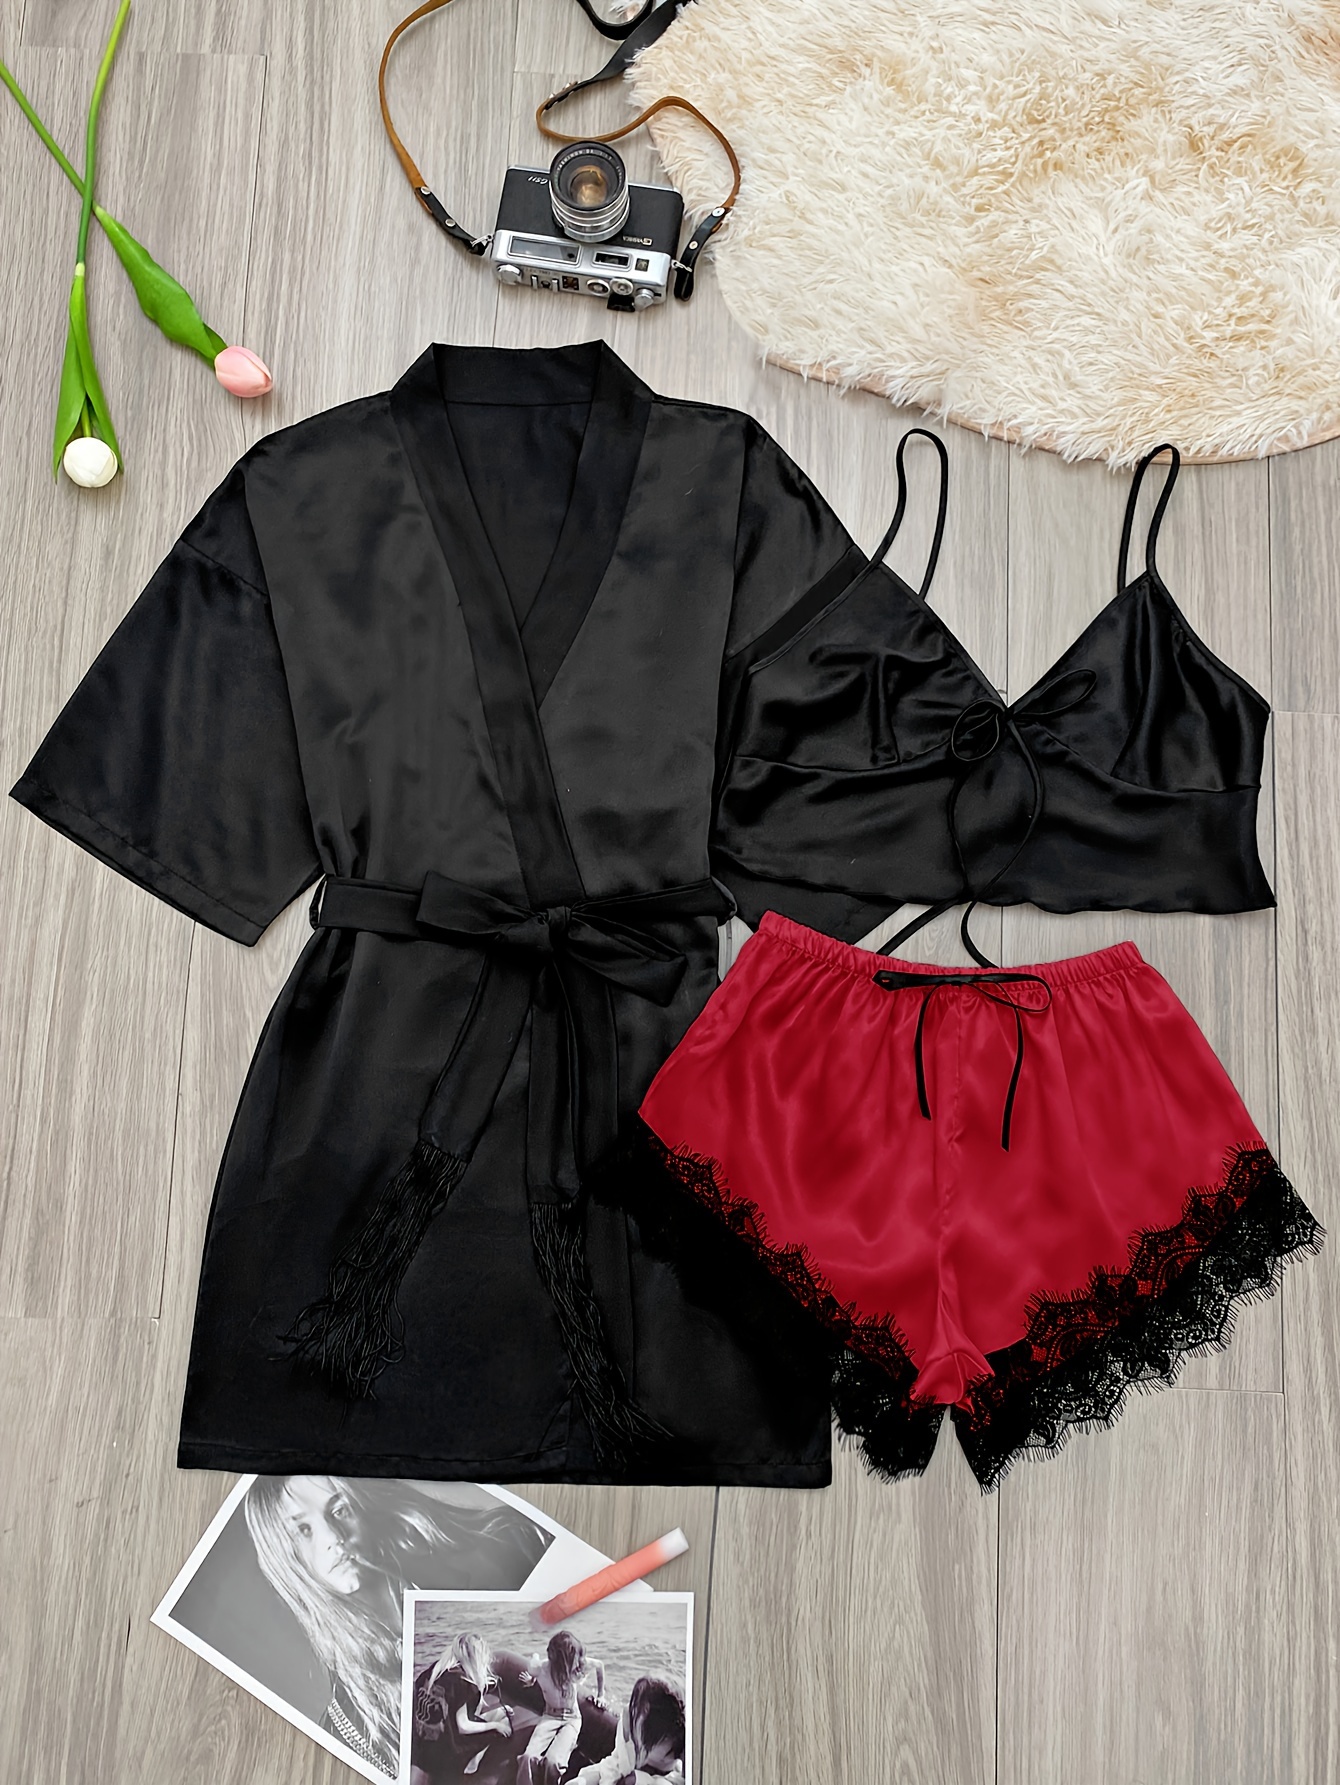 Cami Pajamas Sets for Women Soft Comfy Silk Lace Trim Tank Top and Shorts  Sleeveless V-Neck Nightwear 2 Piece Cute Pjs Sets